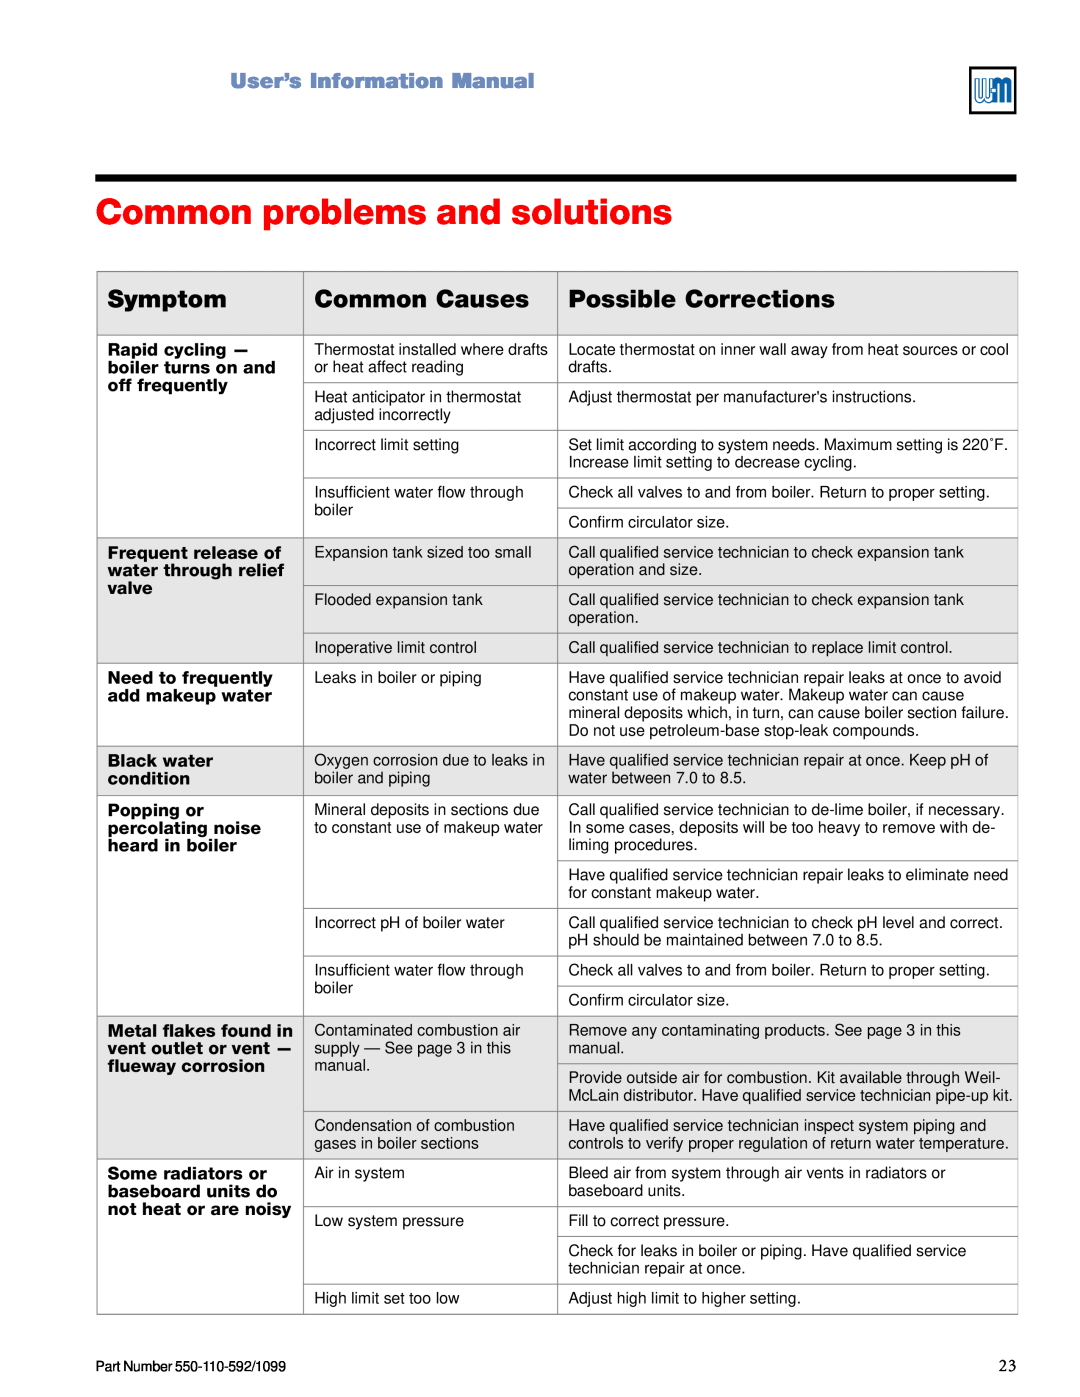 Weil-McLain CGa manual Common problems and solutions, Symptom, Common Causes, Possible Corrections, UserísInformationManual 